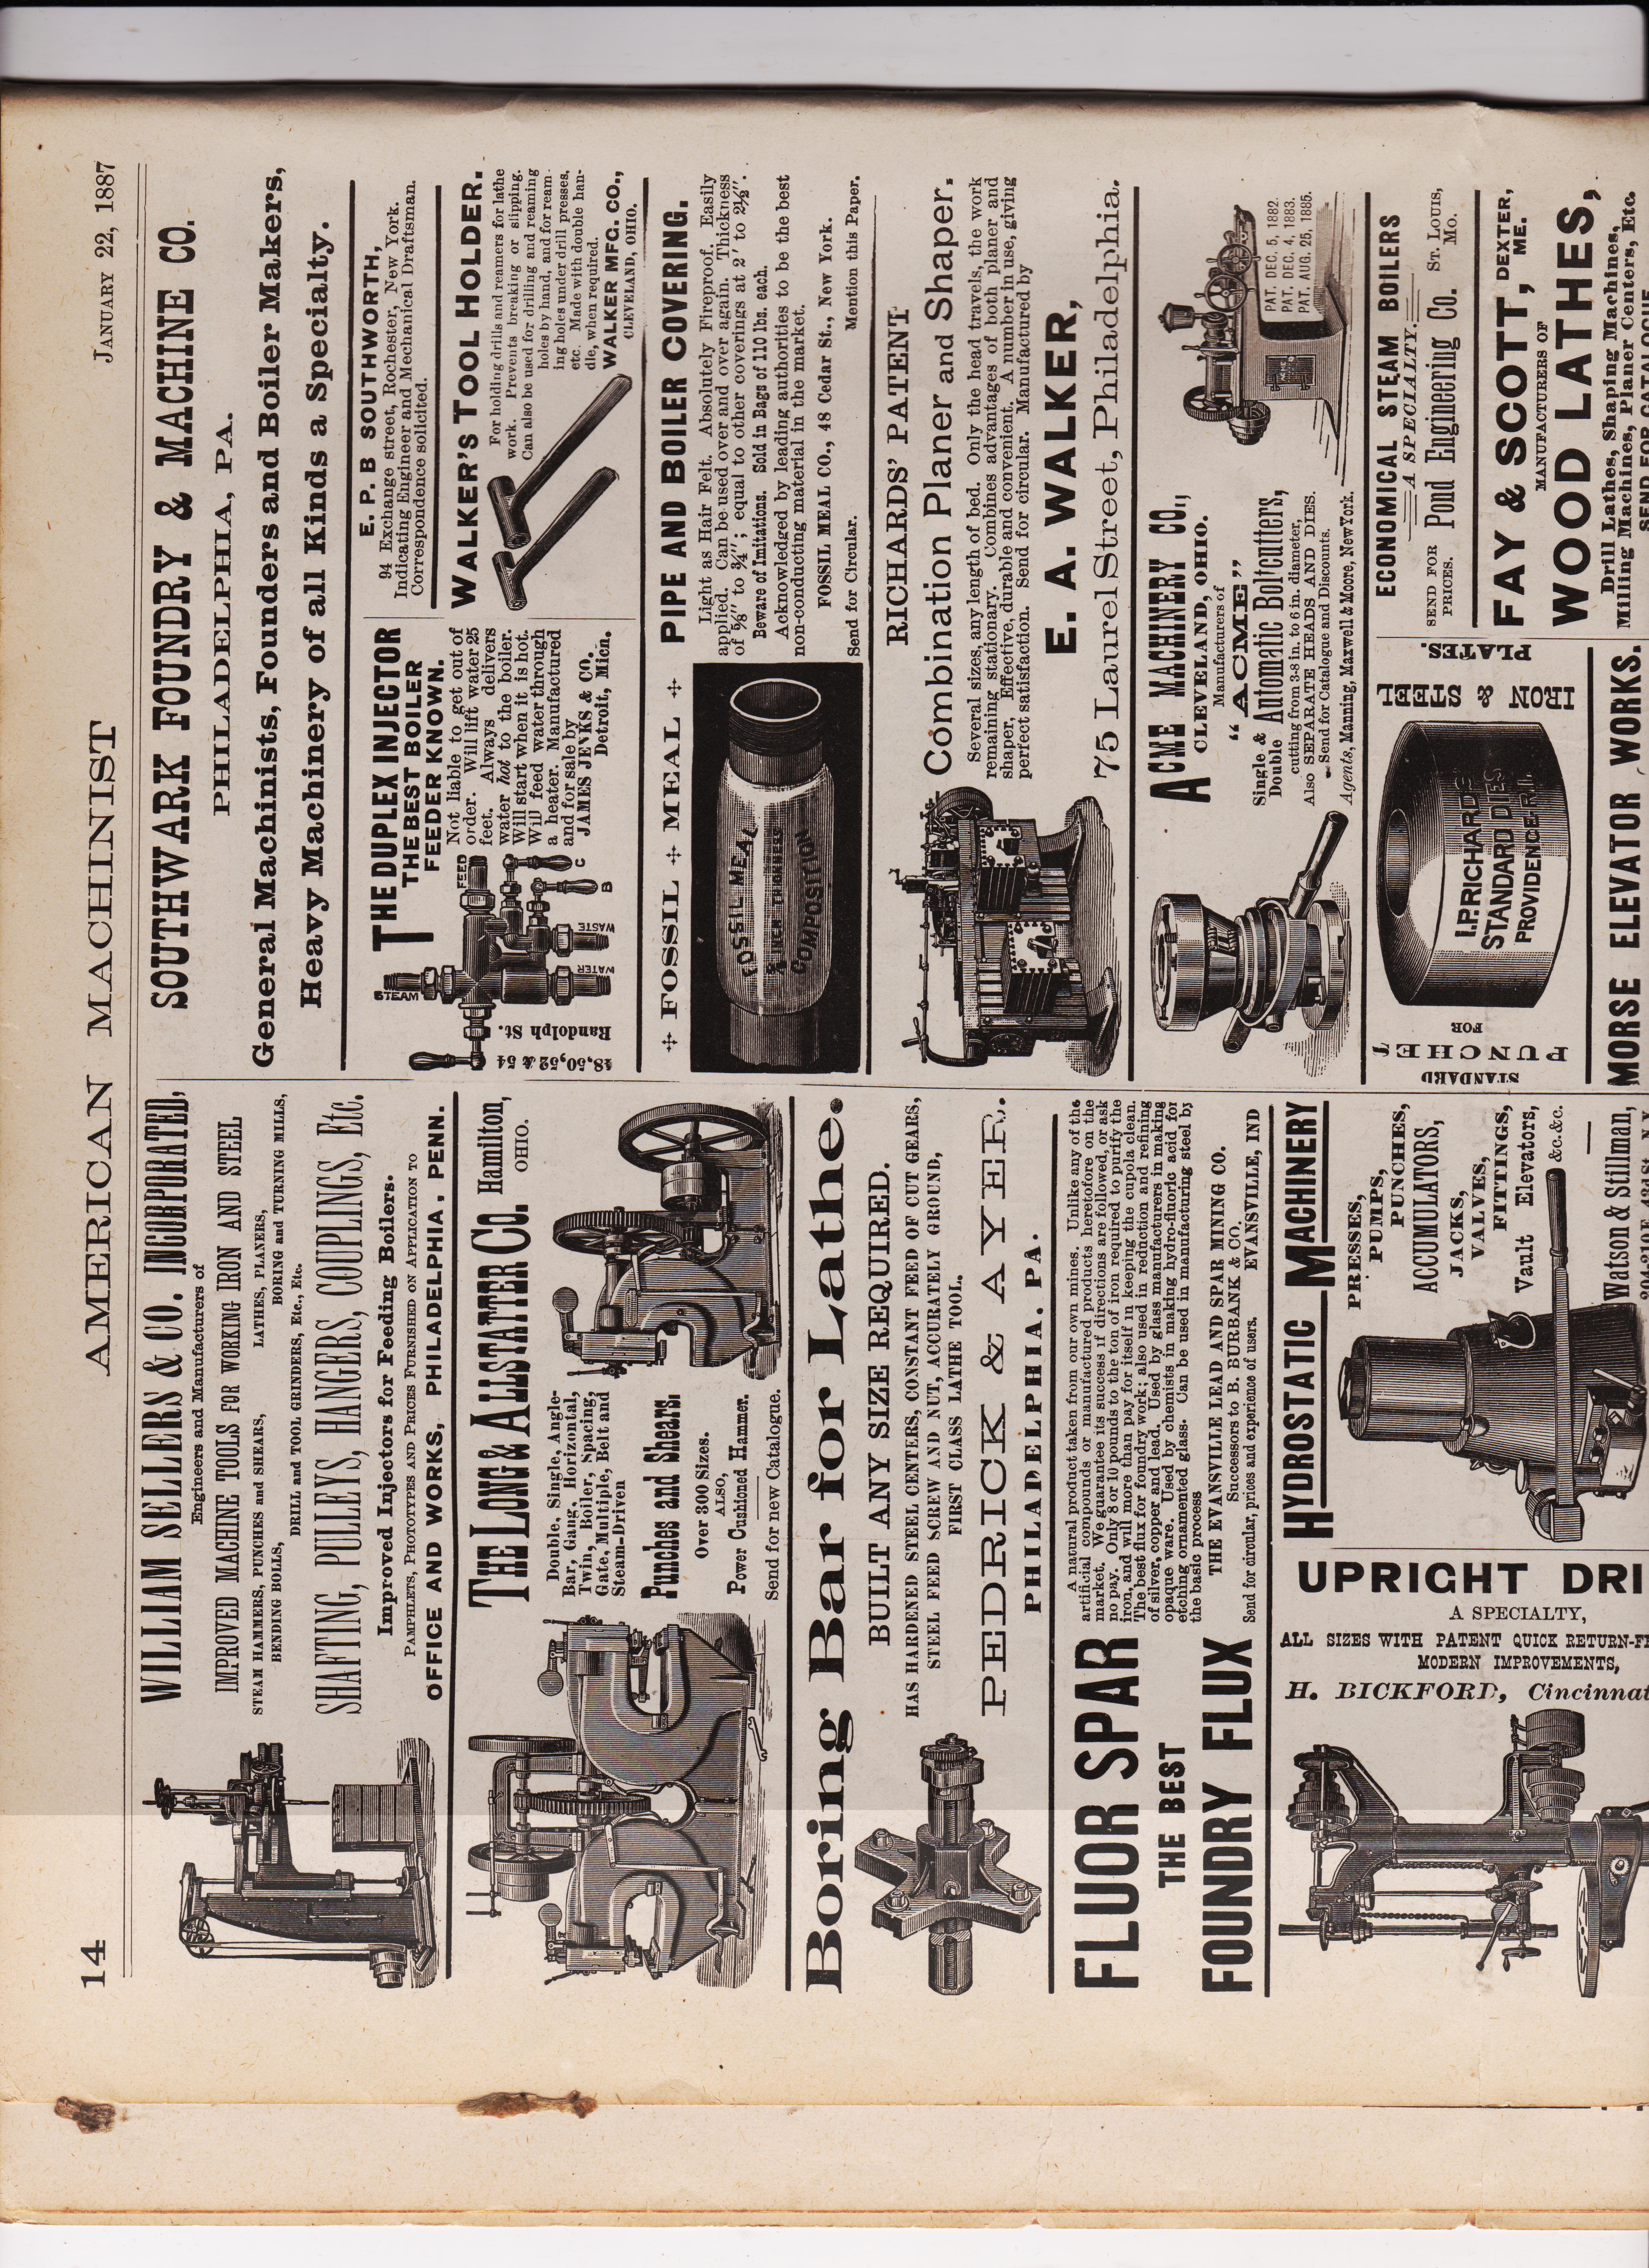 https://antiquemachinery.com/images-American-Machinist-Jan-22-1887/American-Machinist-Jan-15-1887-p-14-top.jpeg